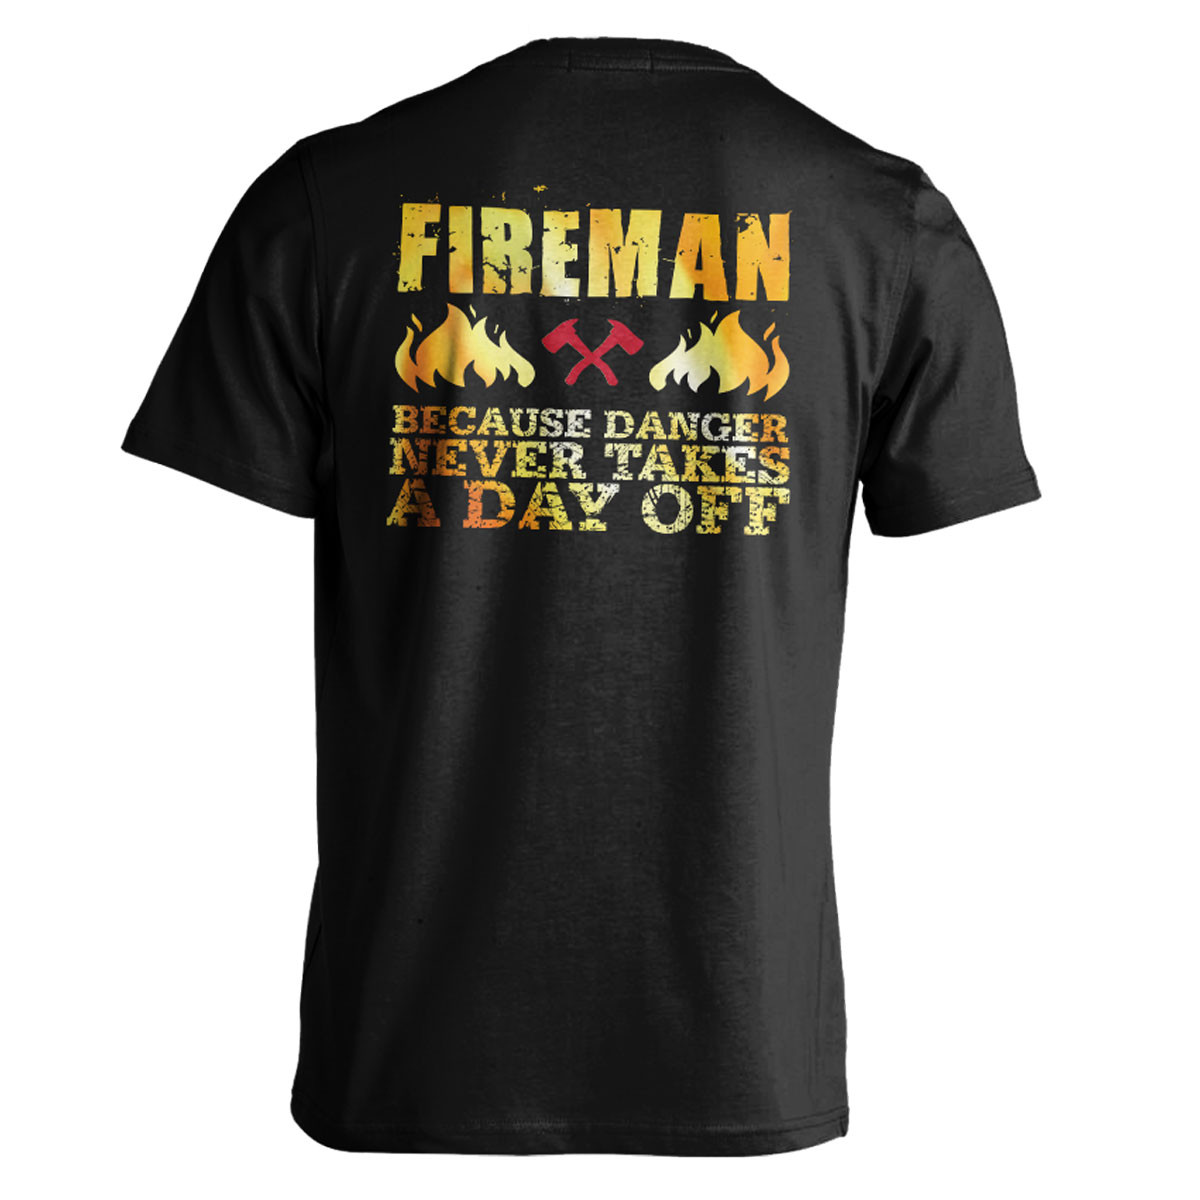 "Fireman Because Danger Never Takes A Day Off" T-Shirt